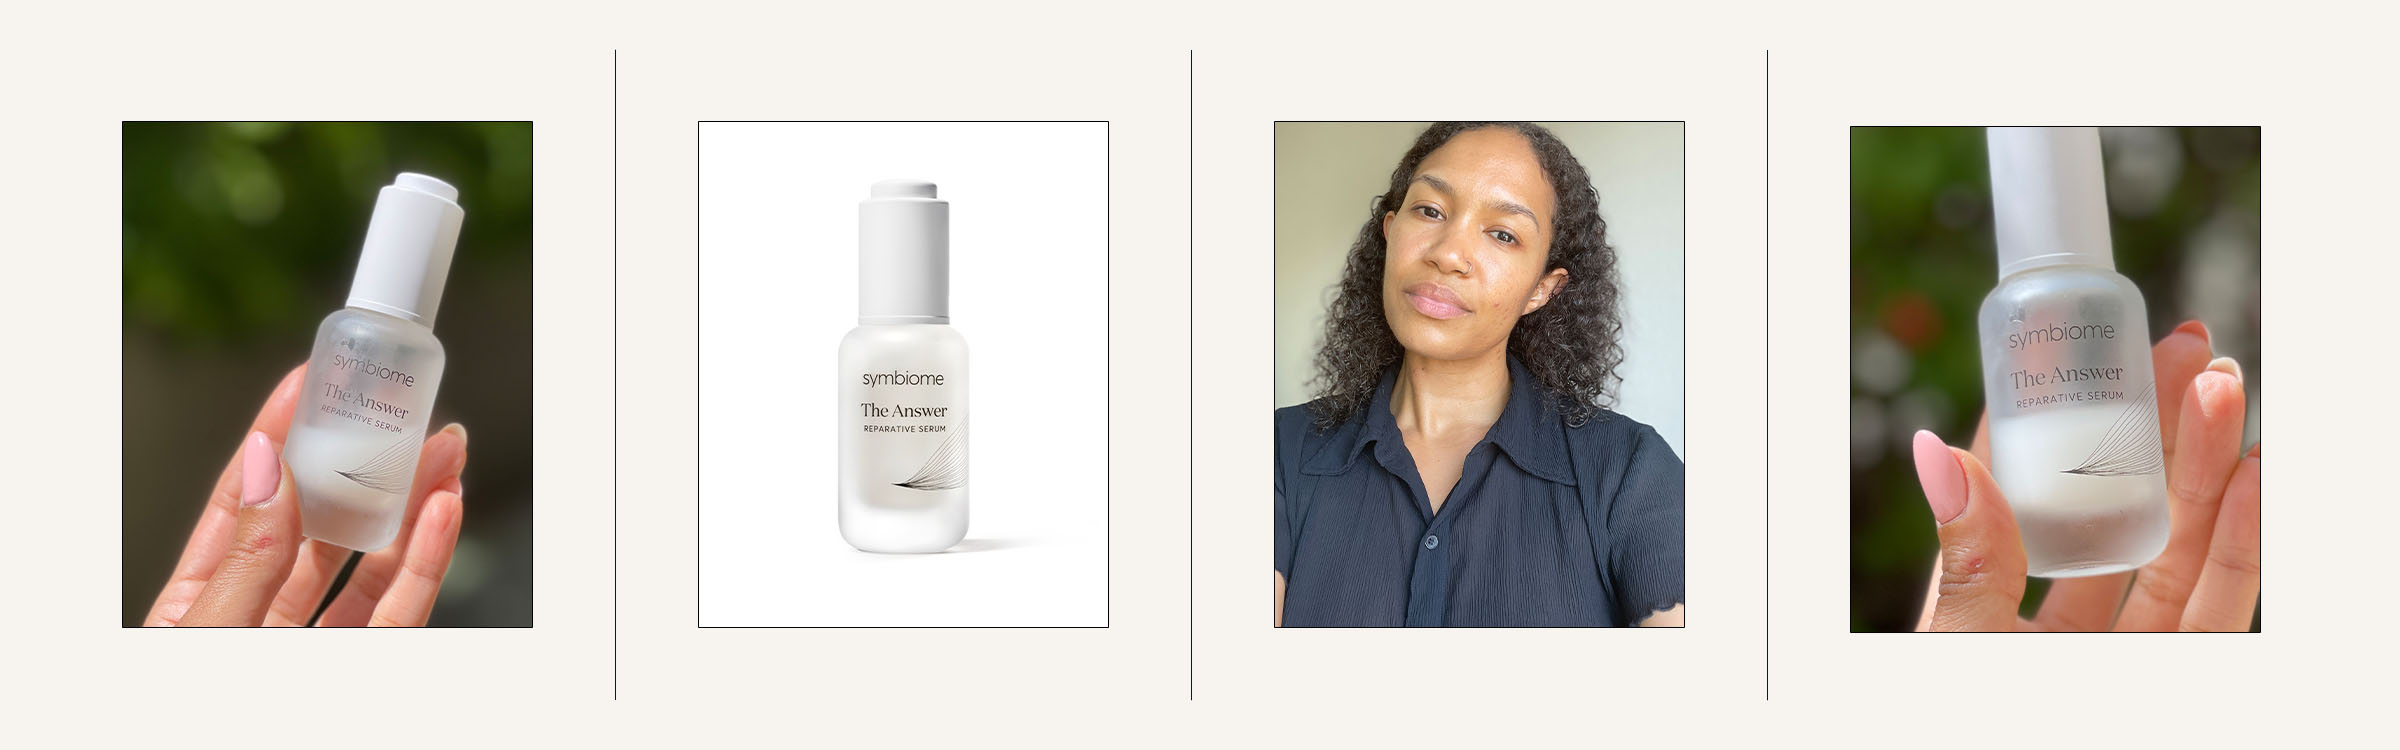 Facialists Call This Serum "Botox in a Bottle," so I Tried It